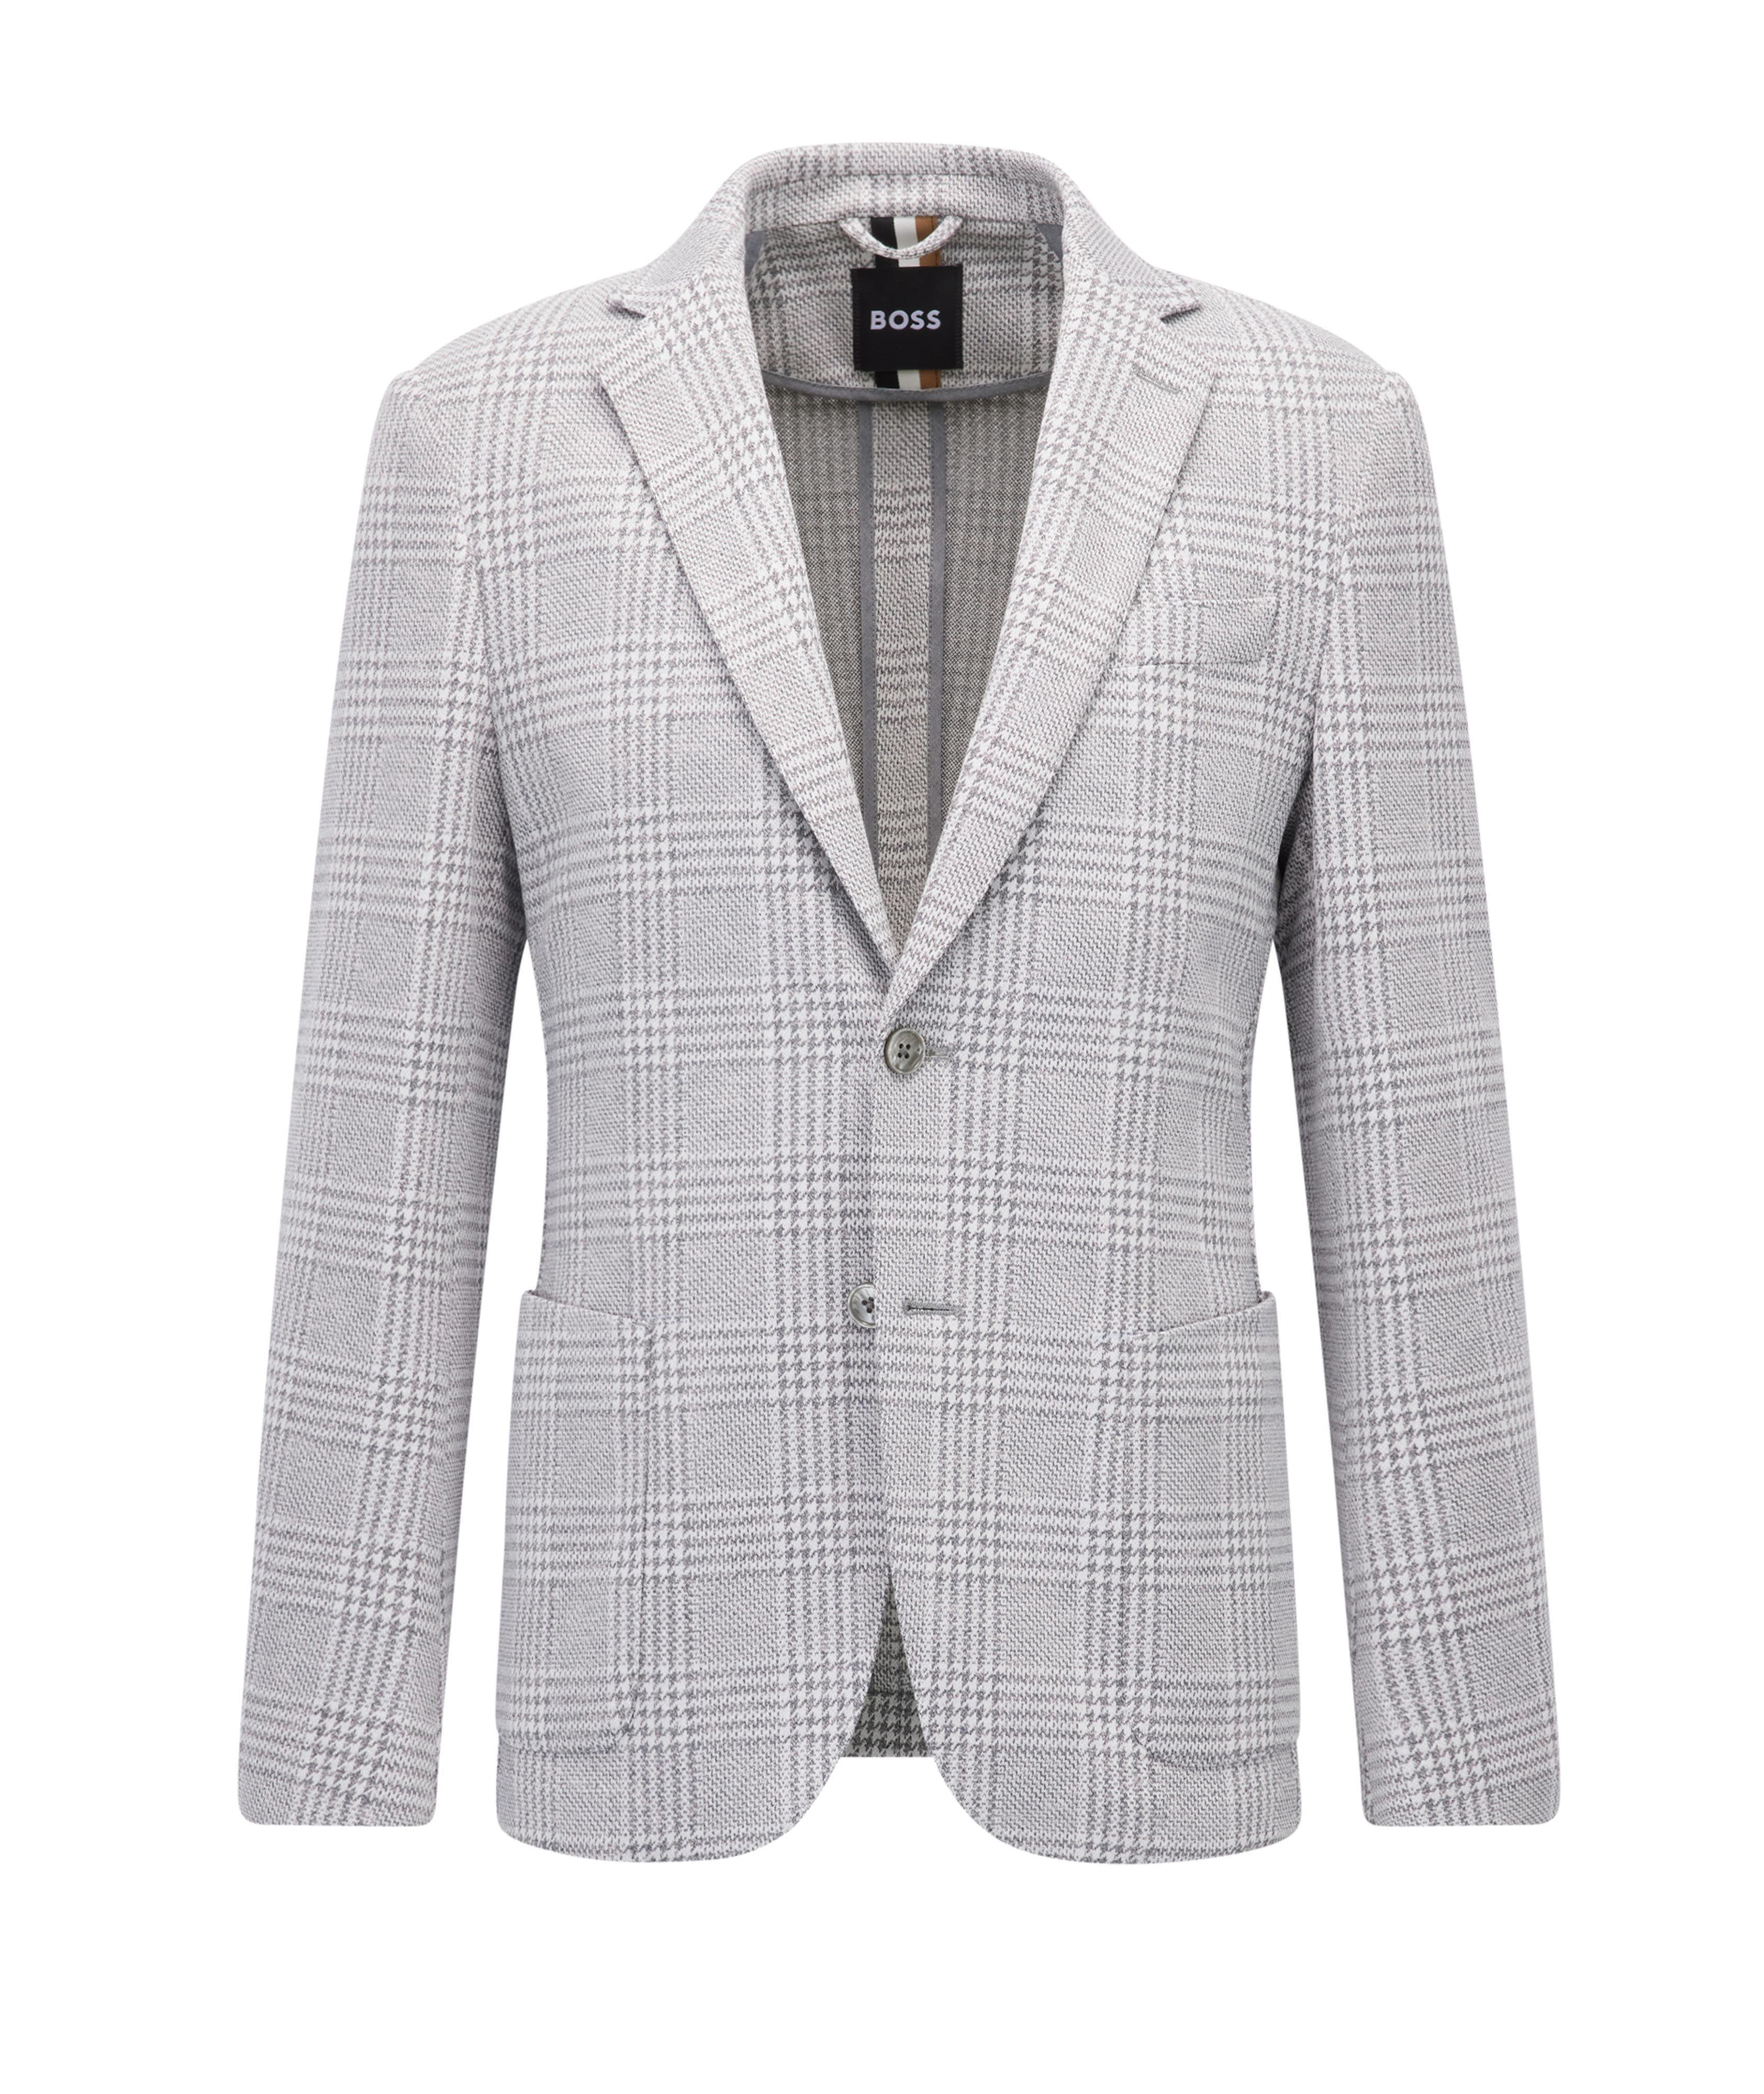 Houndstooth Check Sports Jacket image 0